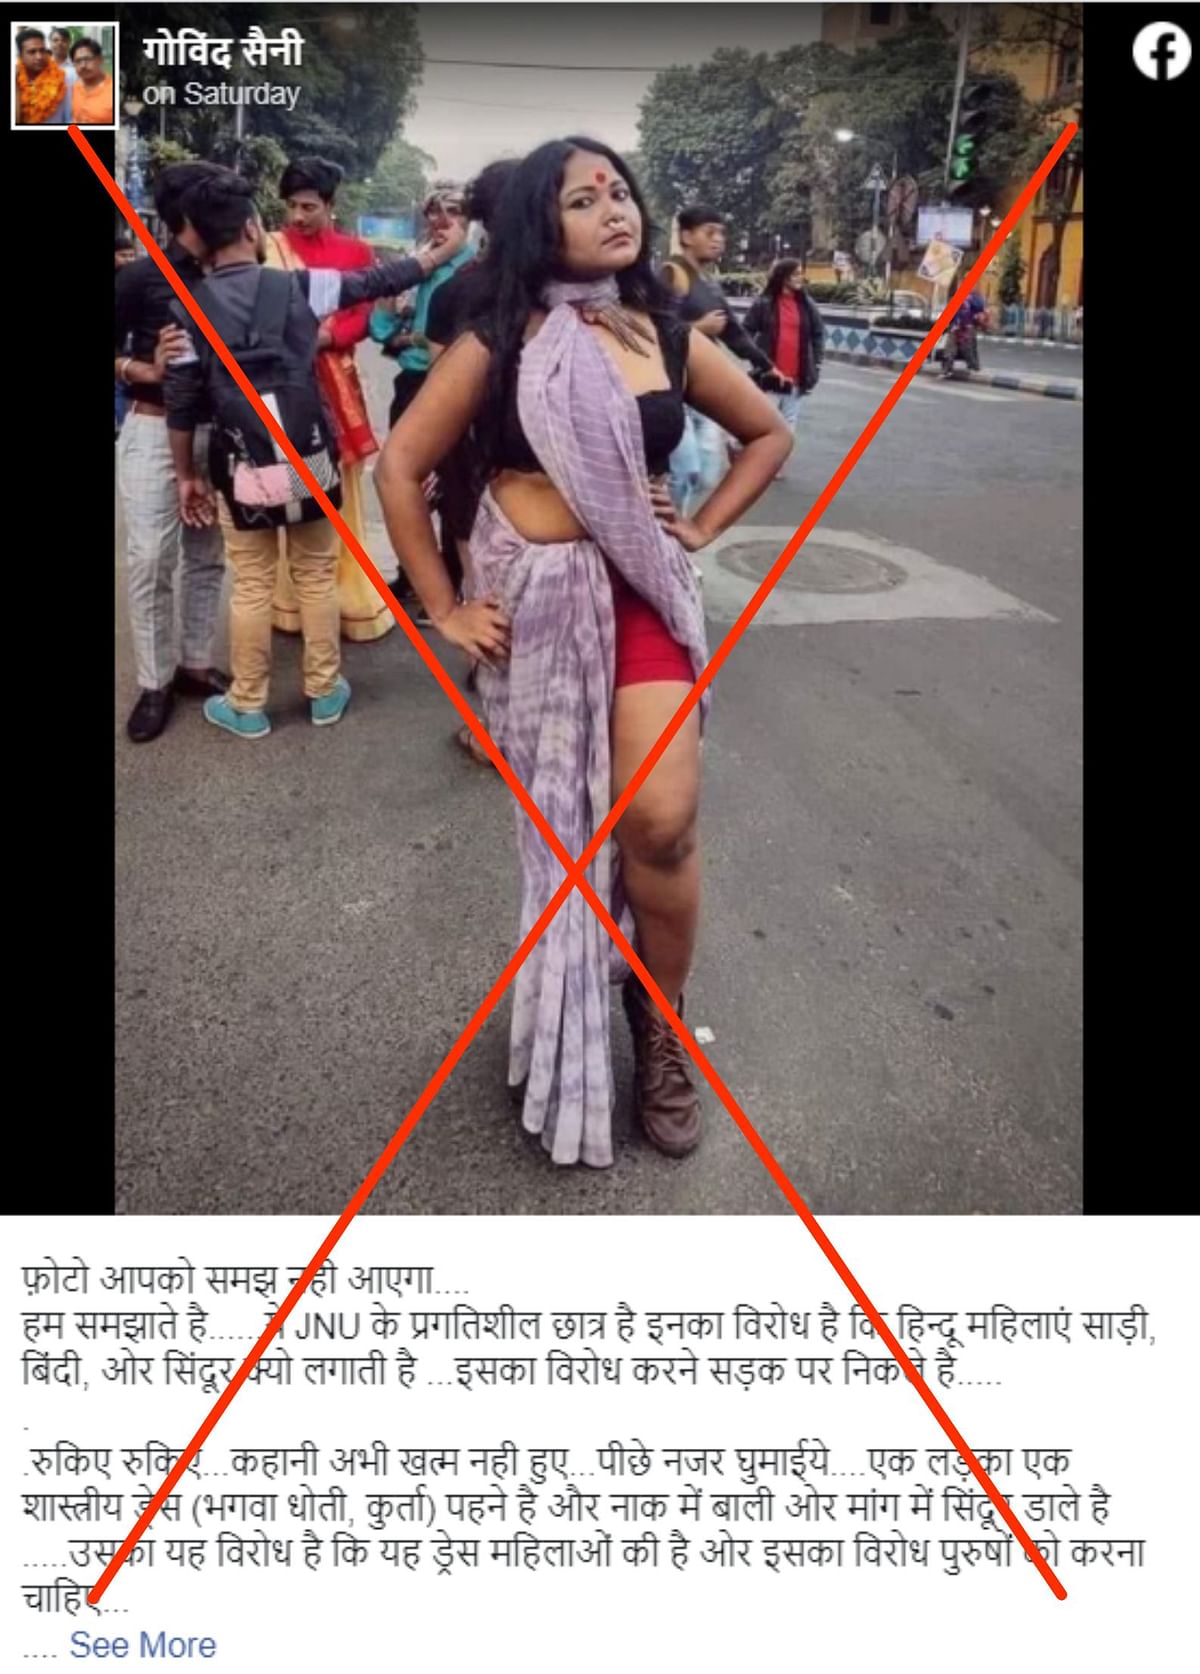 The viral image is from Kolkata’s pride walk in 2019 and is not affiliated to JNU in anyway.